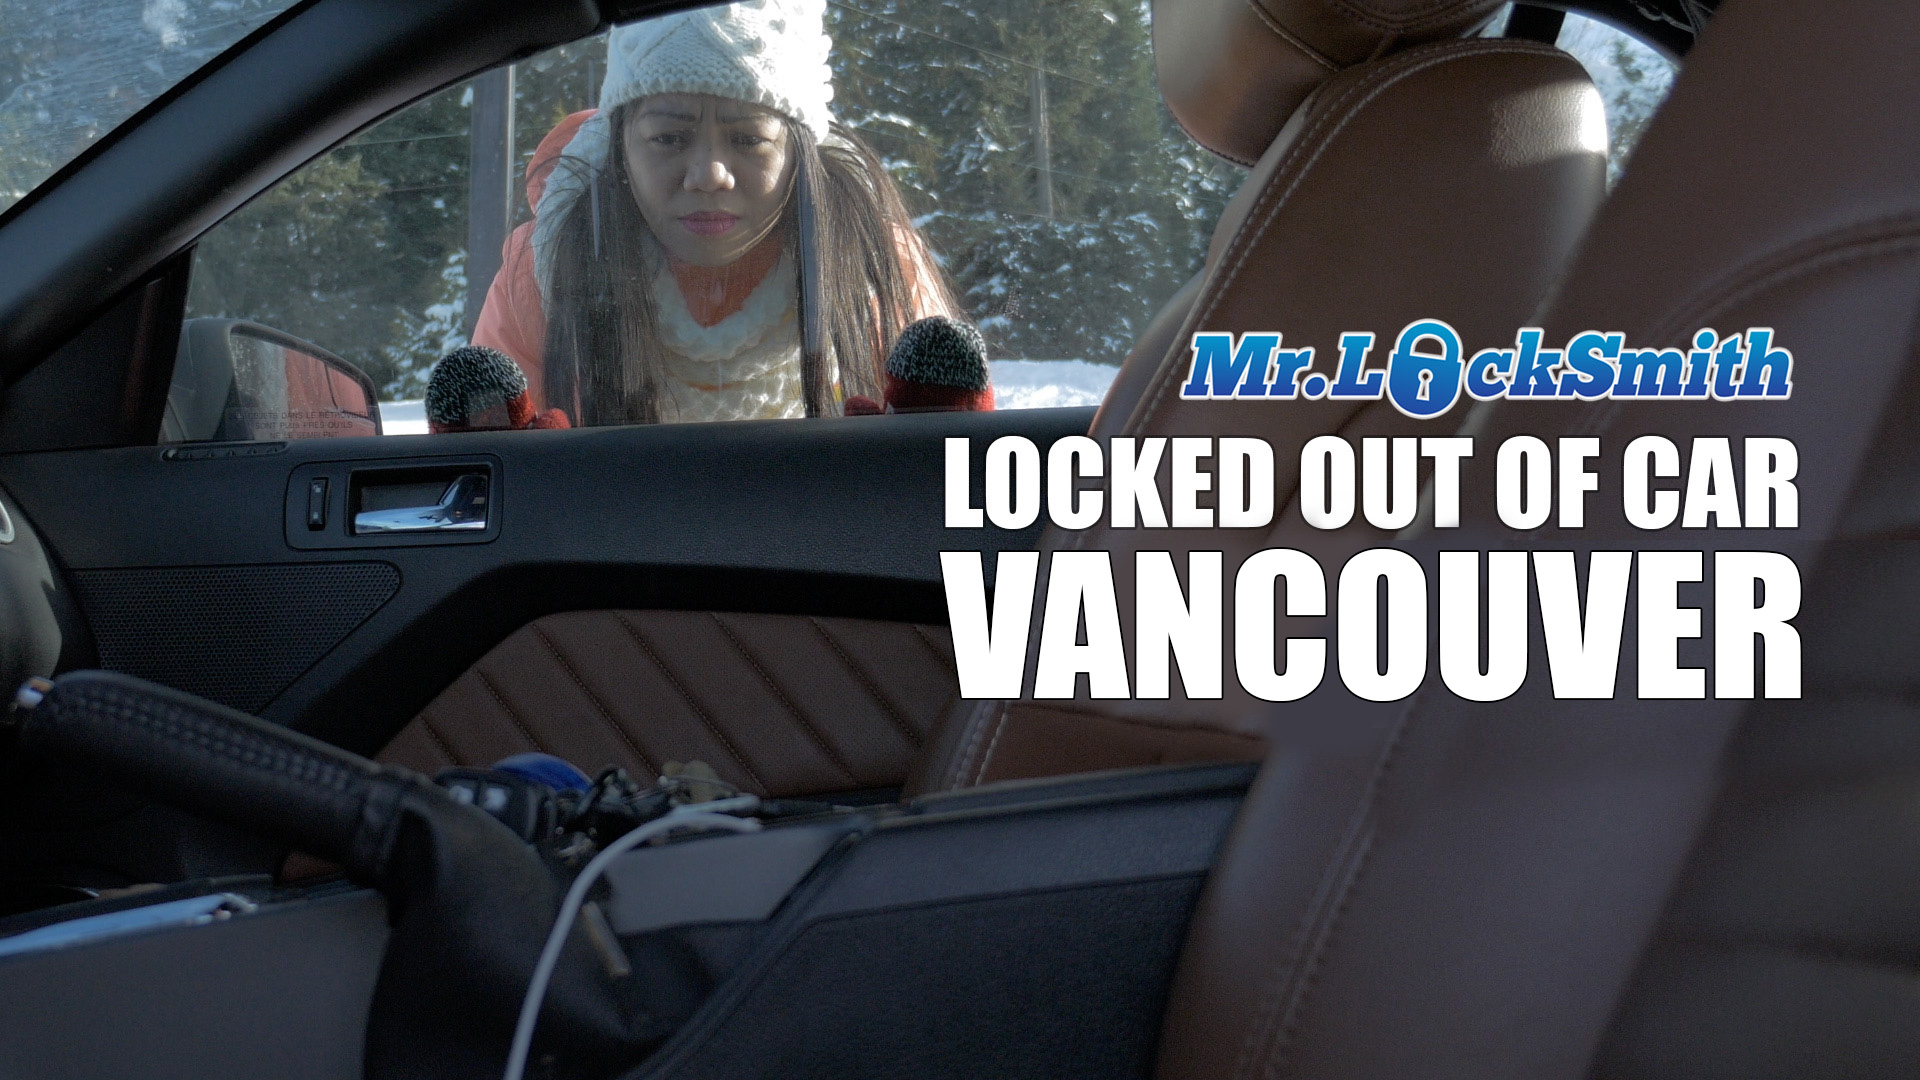 Locked out of car Vancouver